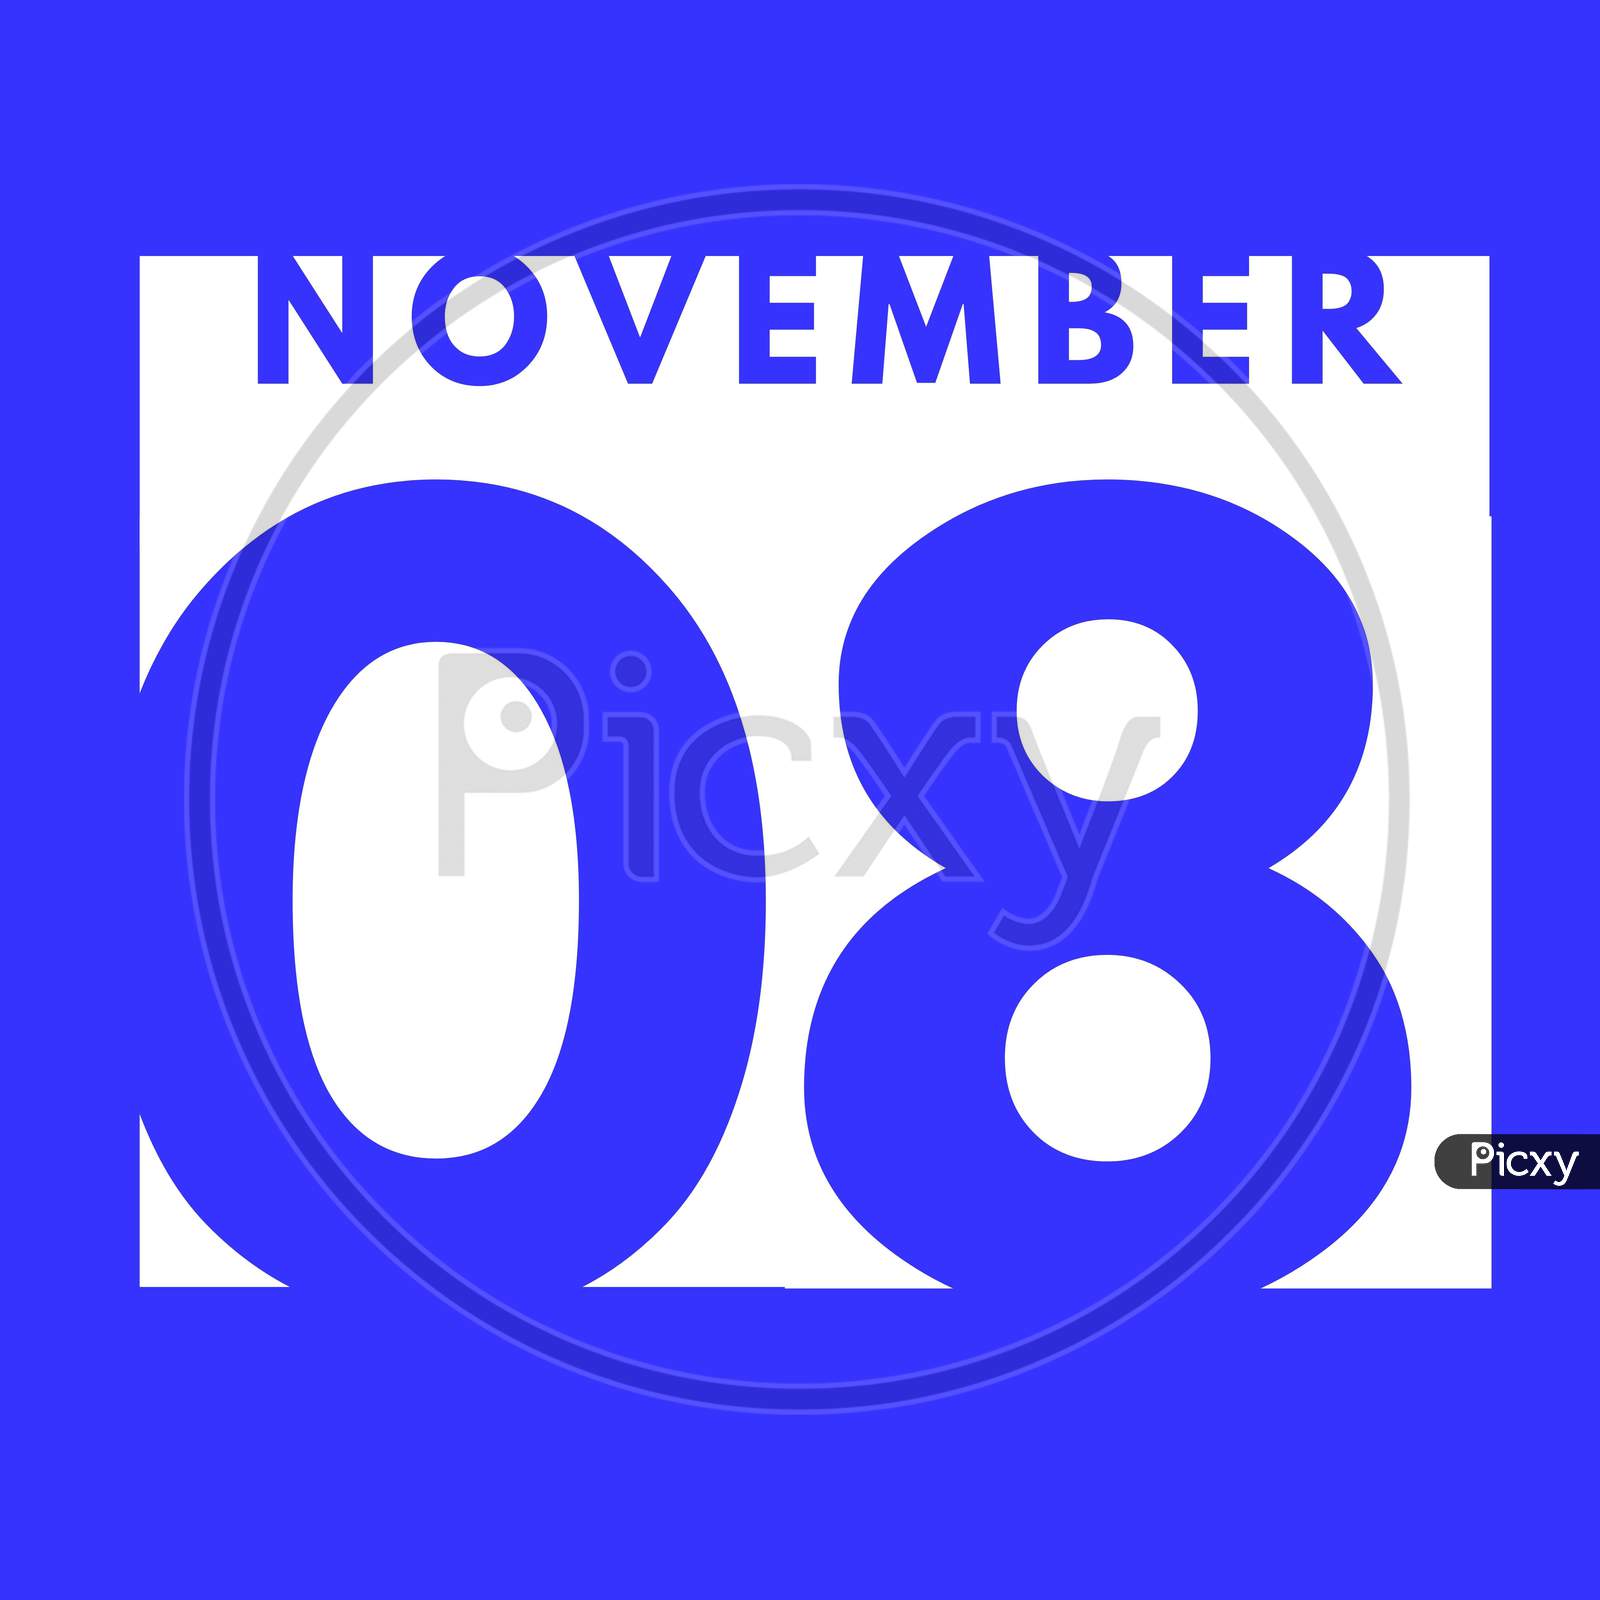 November 8 . Flat Modern Daily Calendar Icon .Date ,Day, Month .Calendar For The Month Of November